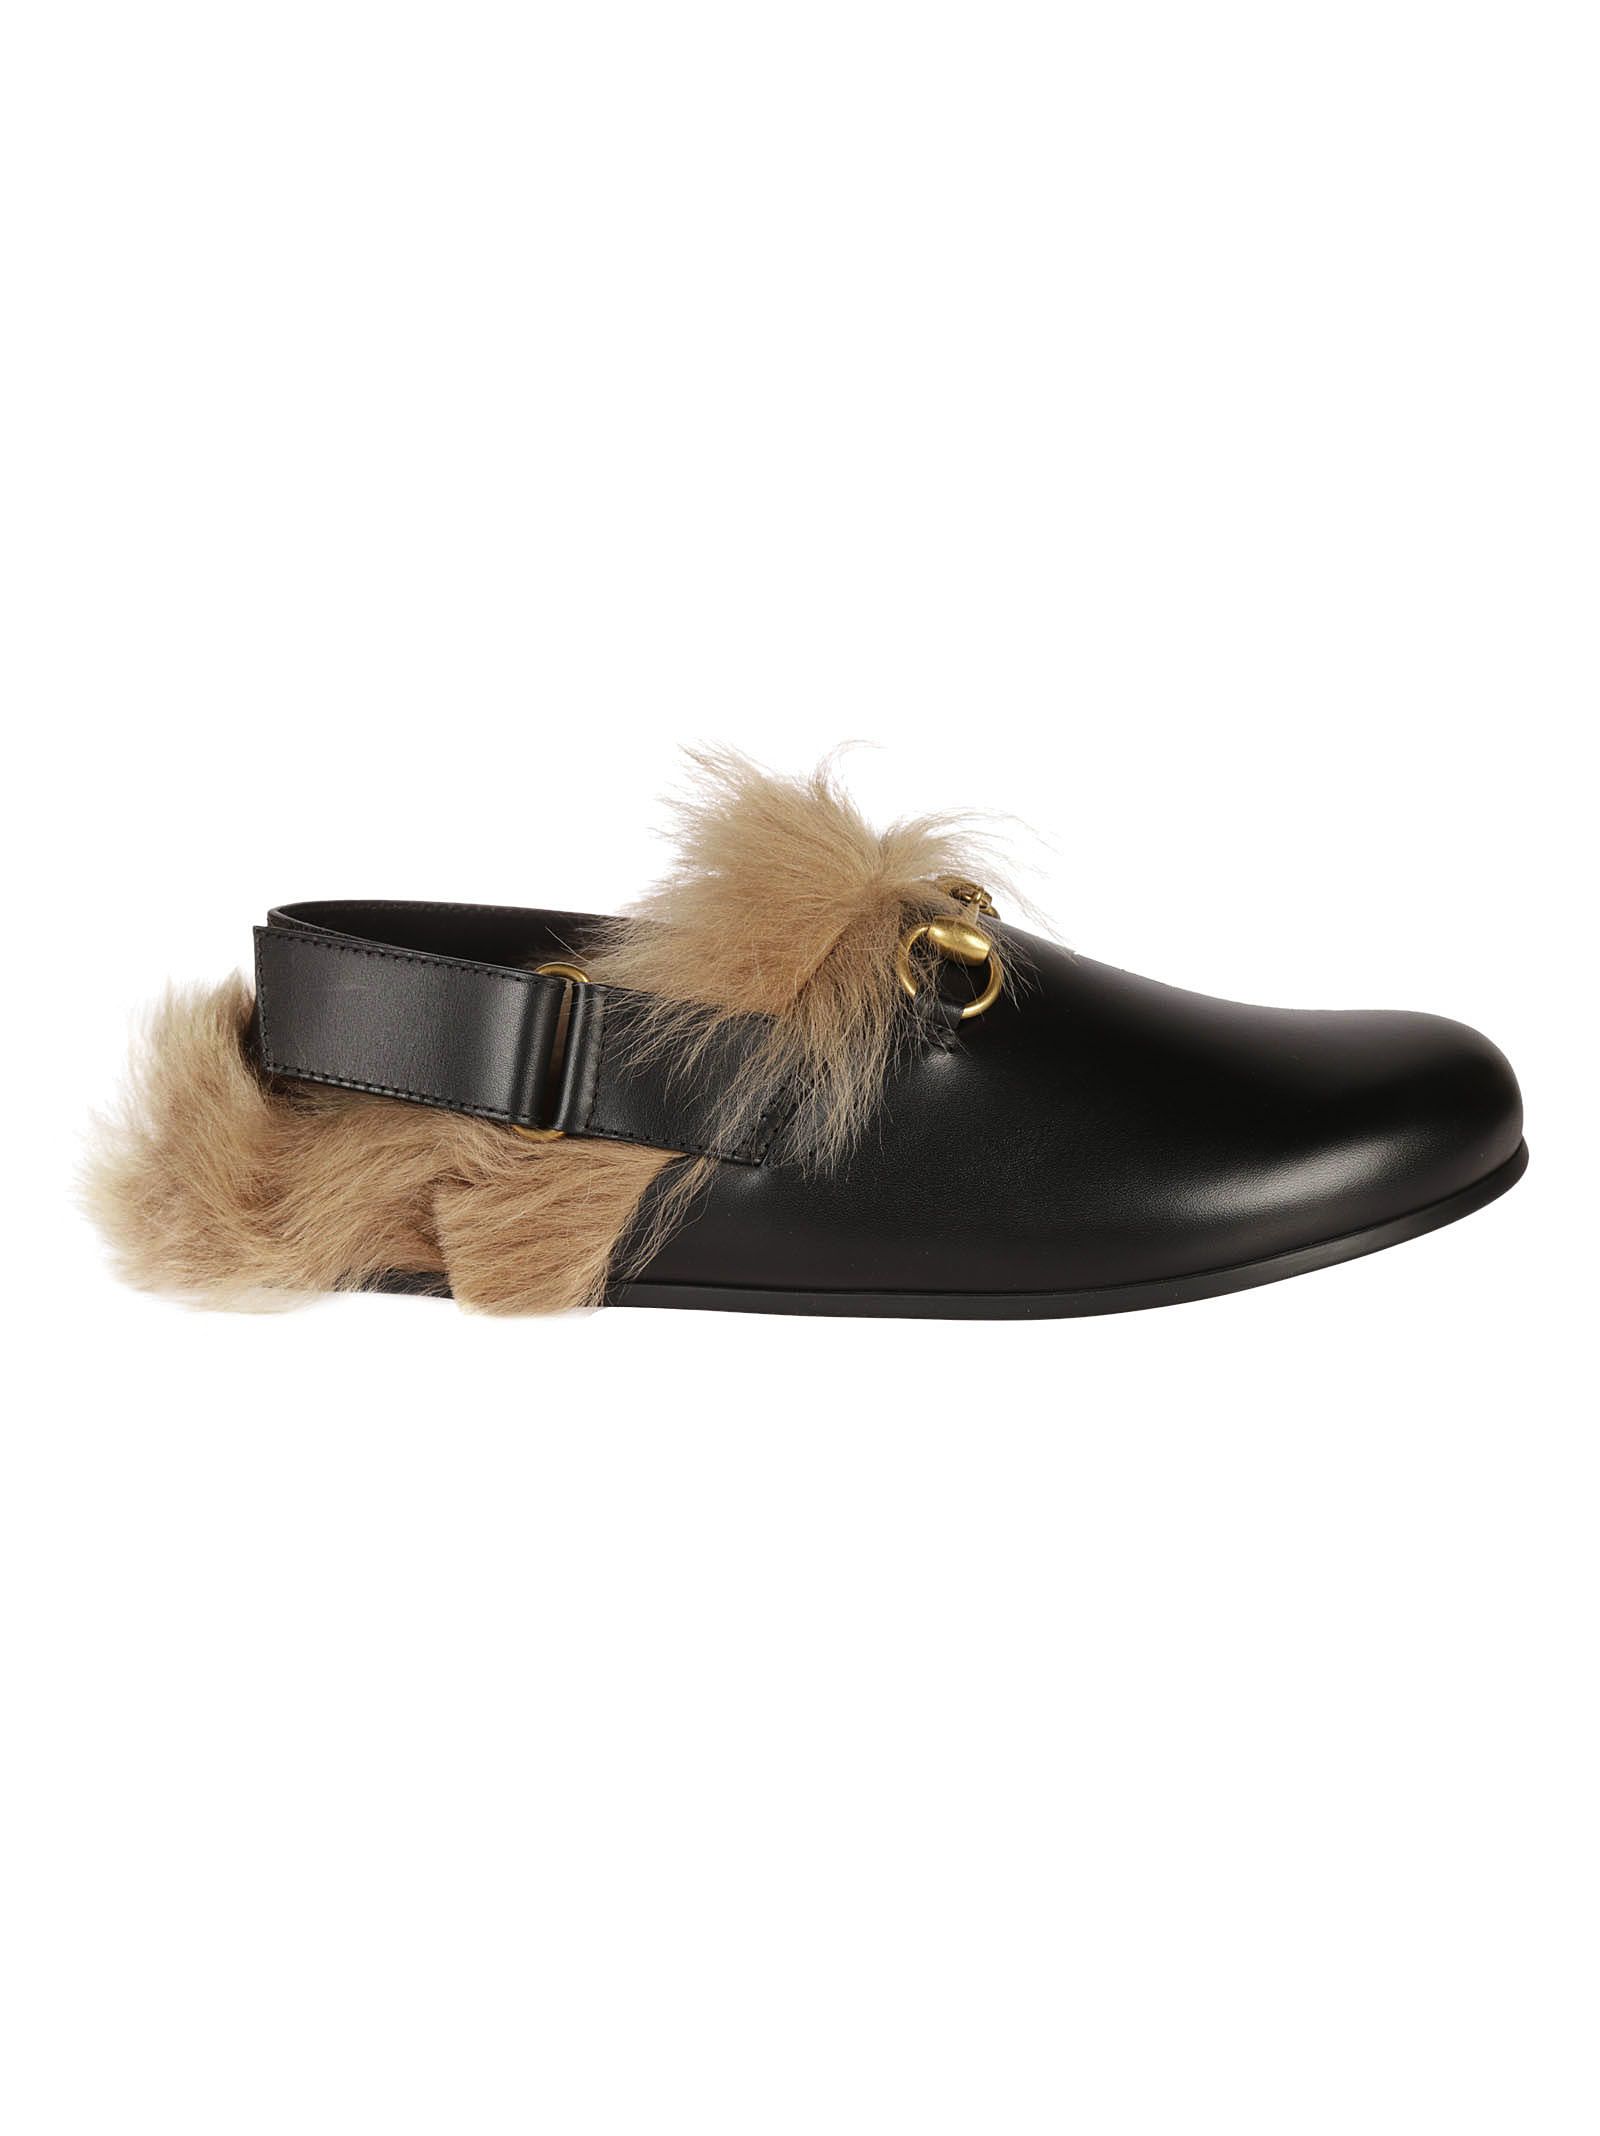 Gucci - Gucci Shearling-lined Slippers - Black, Men's Other Shoes | Italist